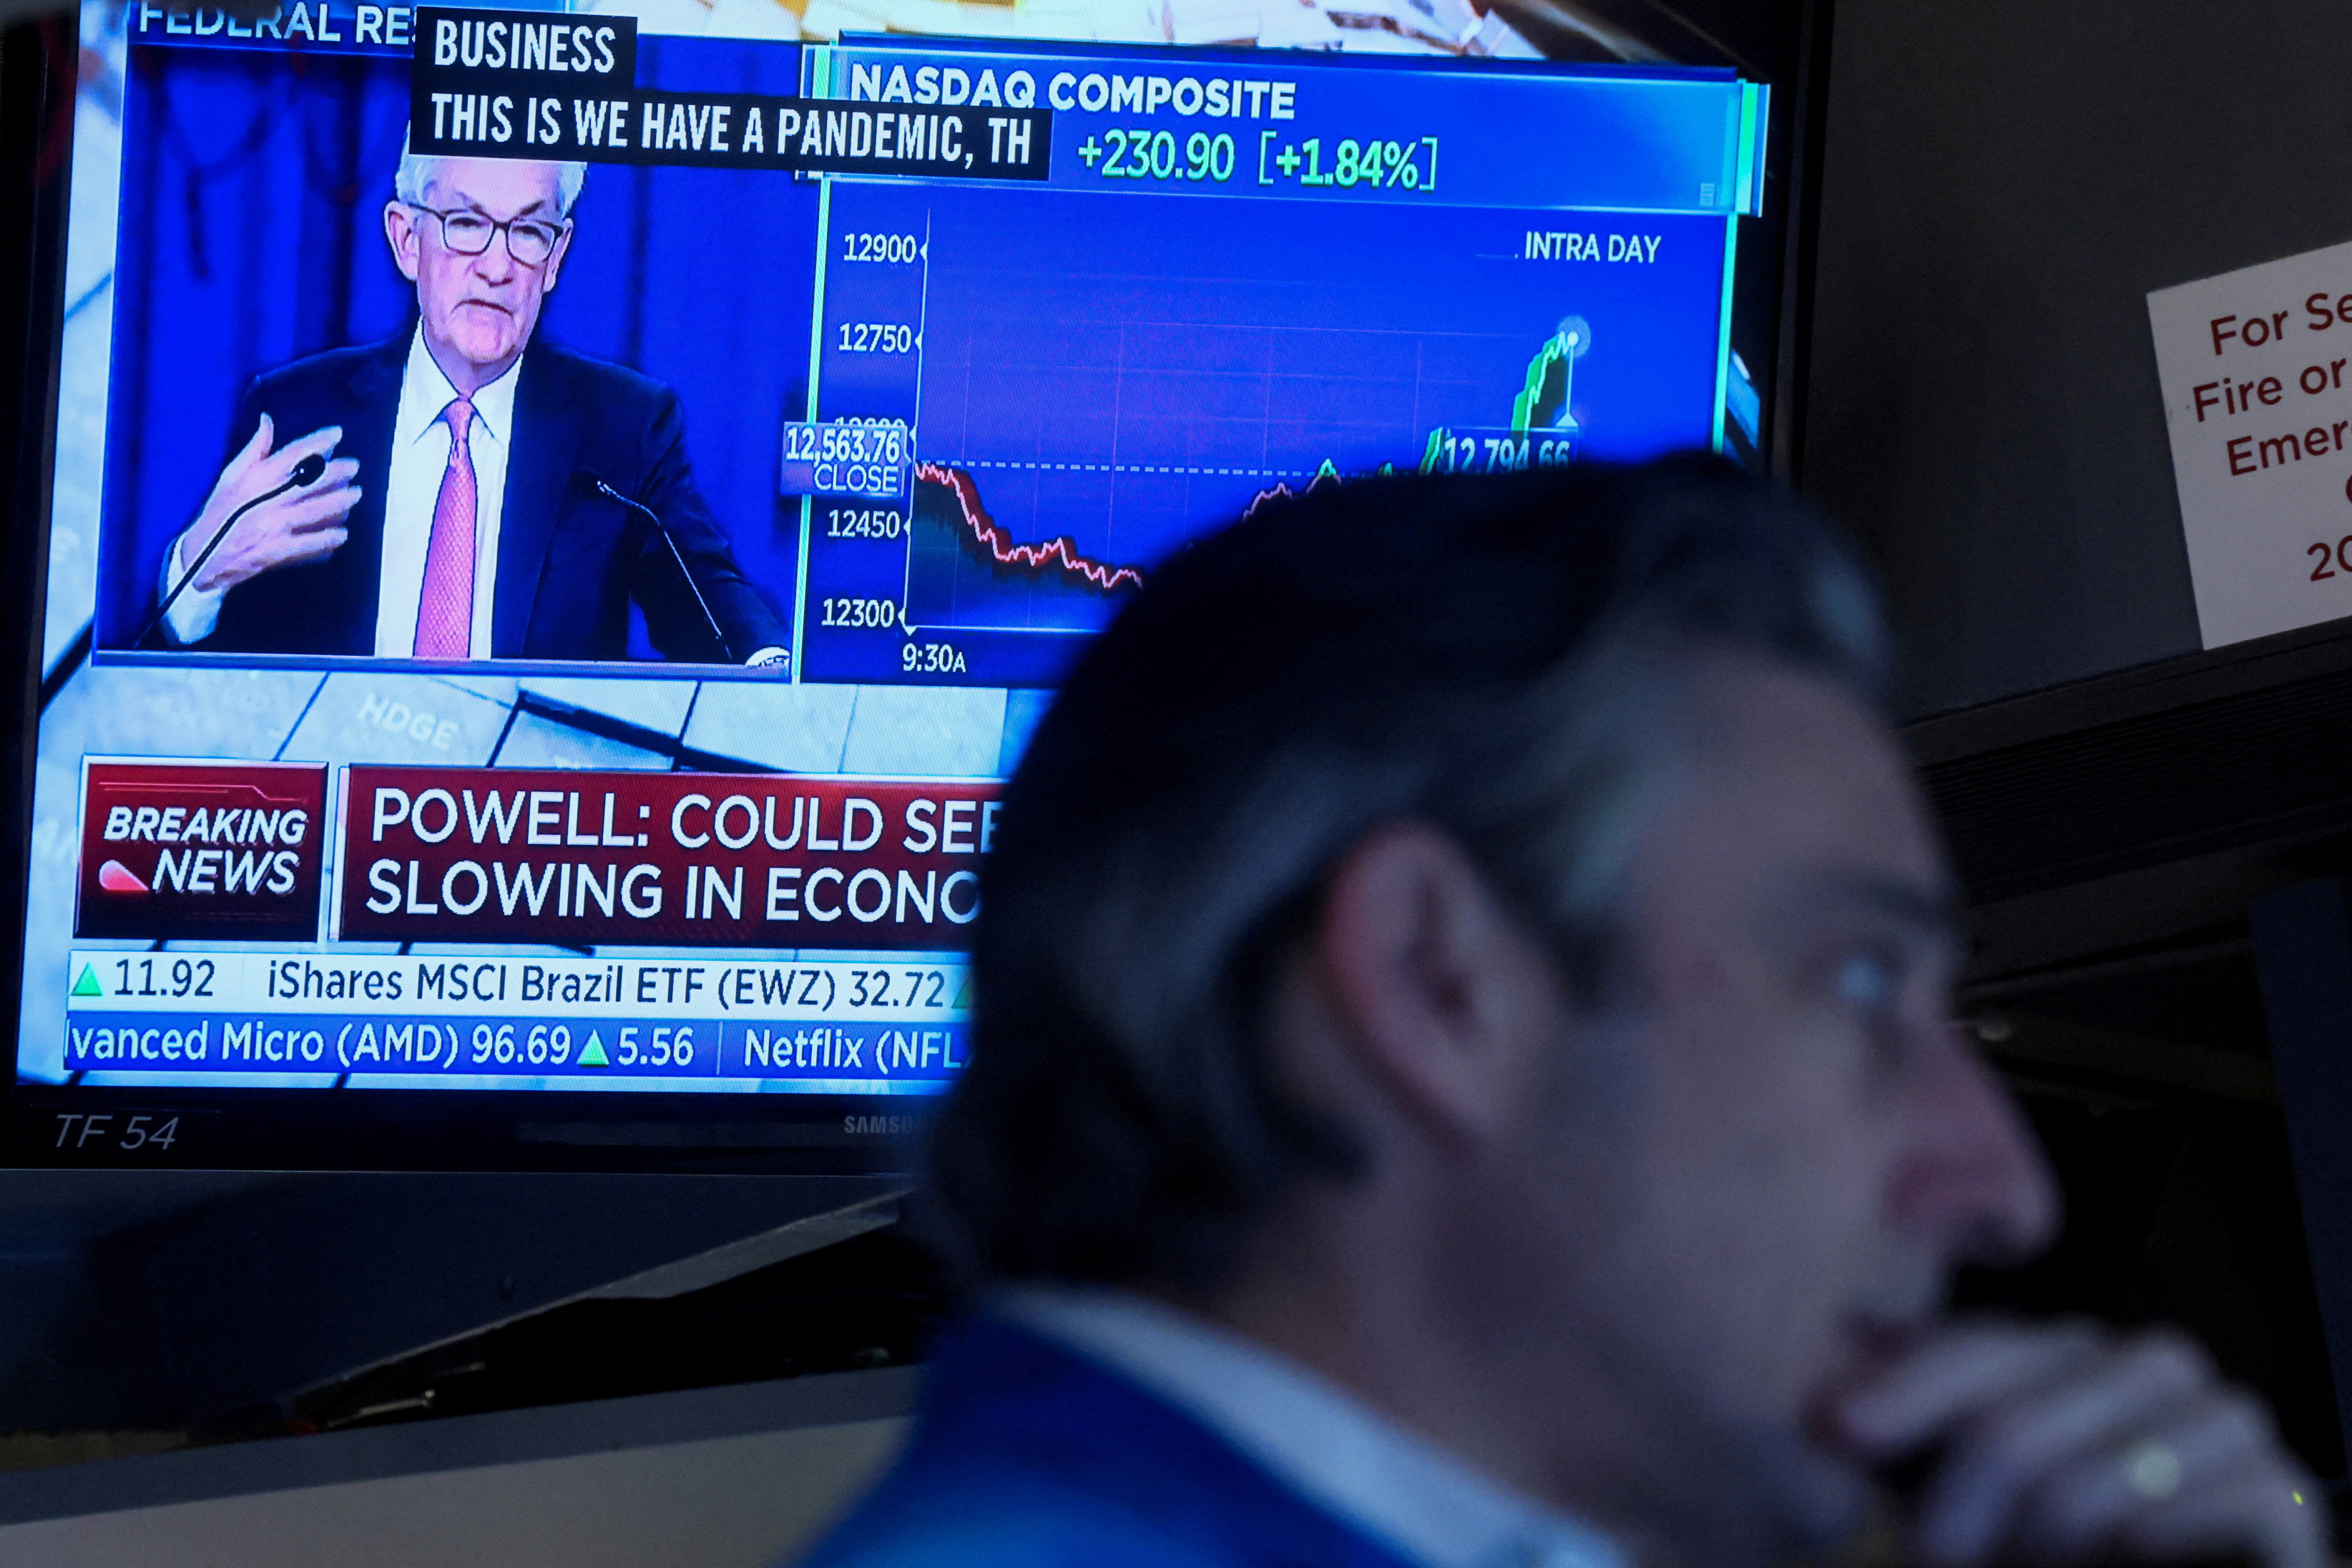 A trader works on the floor of the New York Stock Exchange on May 4 as US Federal Reserve chairman Jerome Powell delivers remarks on a screen. Photo: Reuters